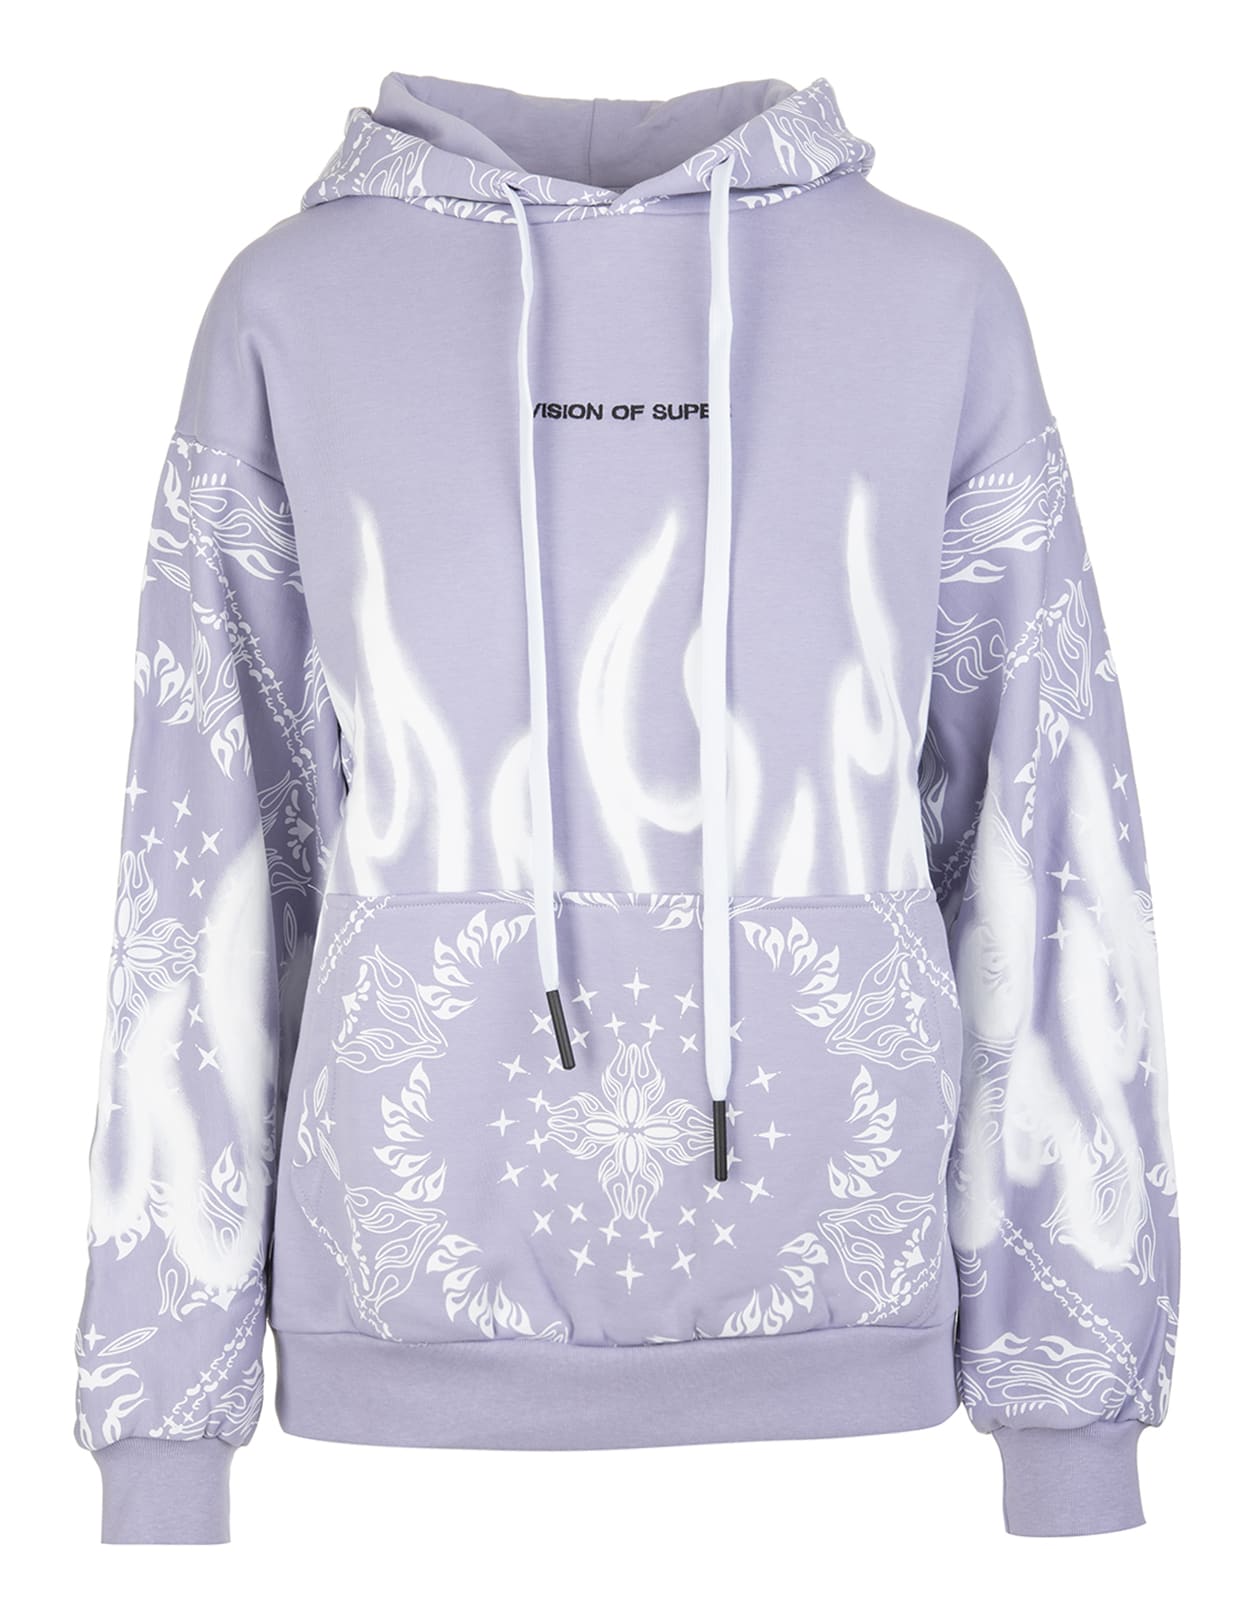 Vision of Super Unisex Lilac Hoodie With Bandana Print